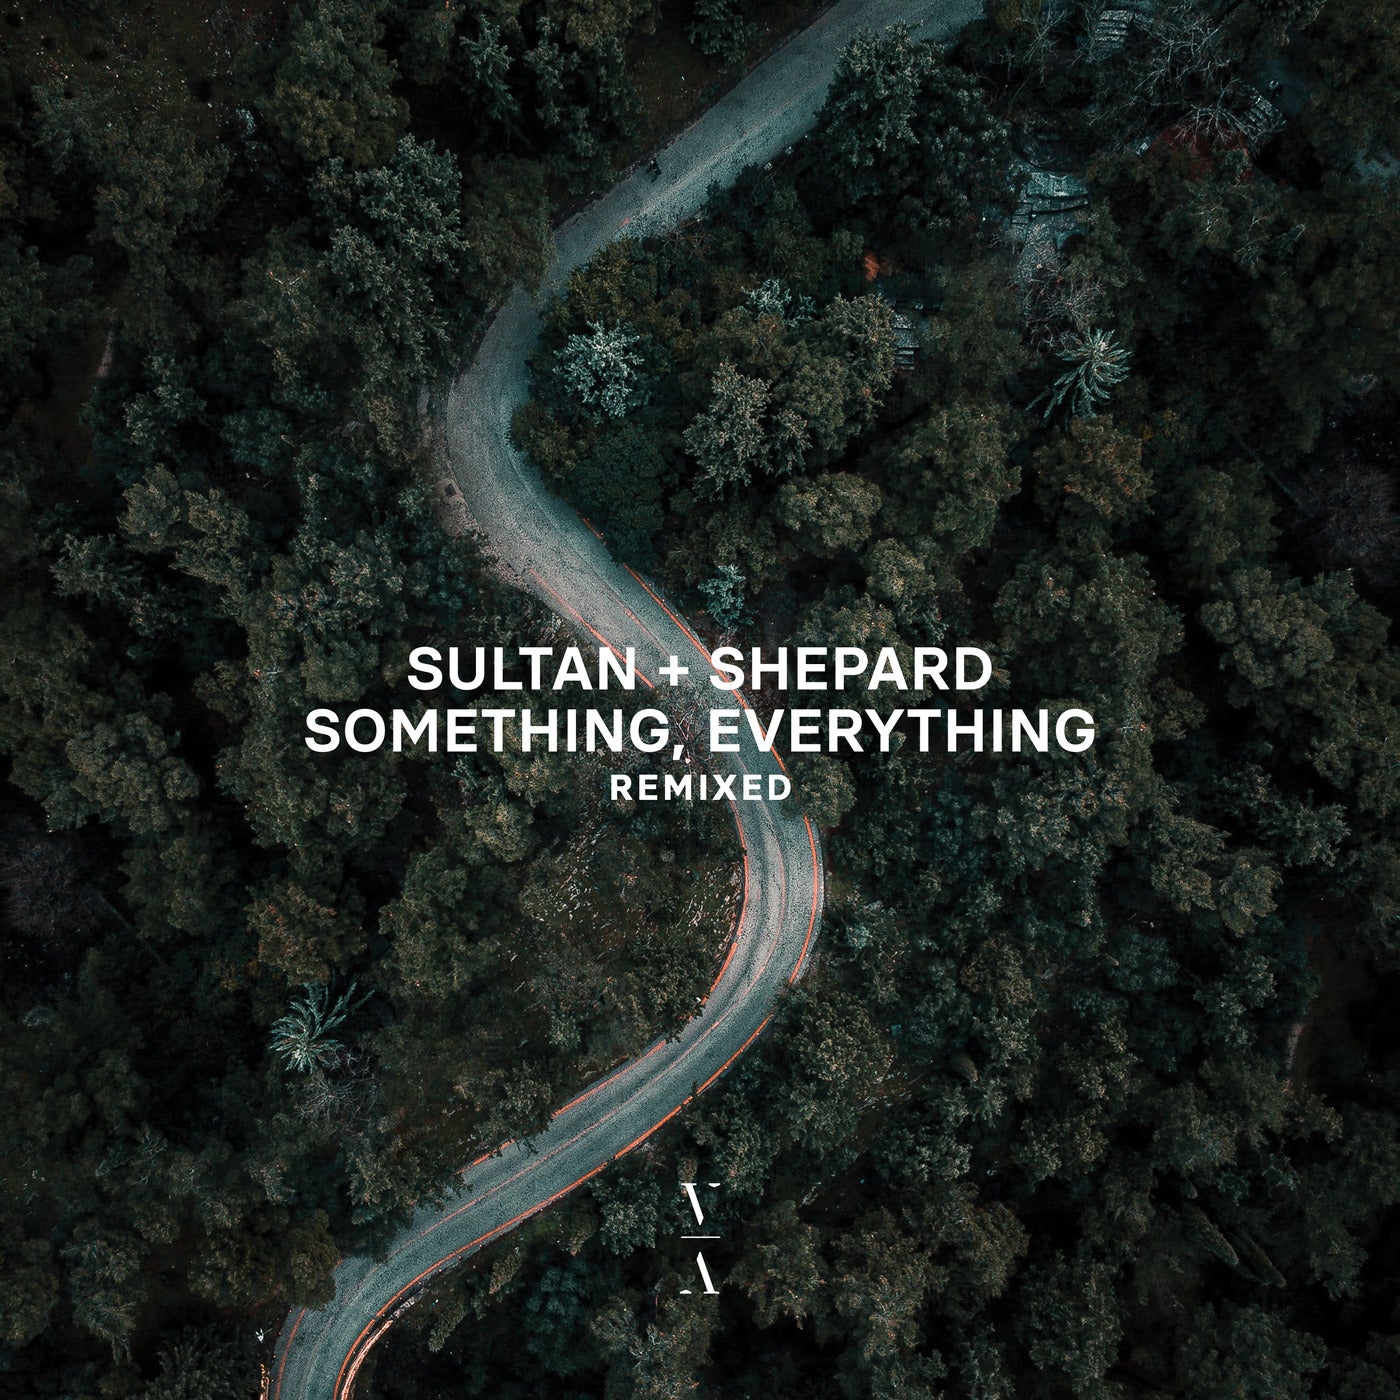 image cover: Sultan + Shepard - Something, Everything Remixed / TNHLP003RE